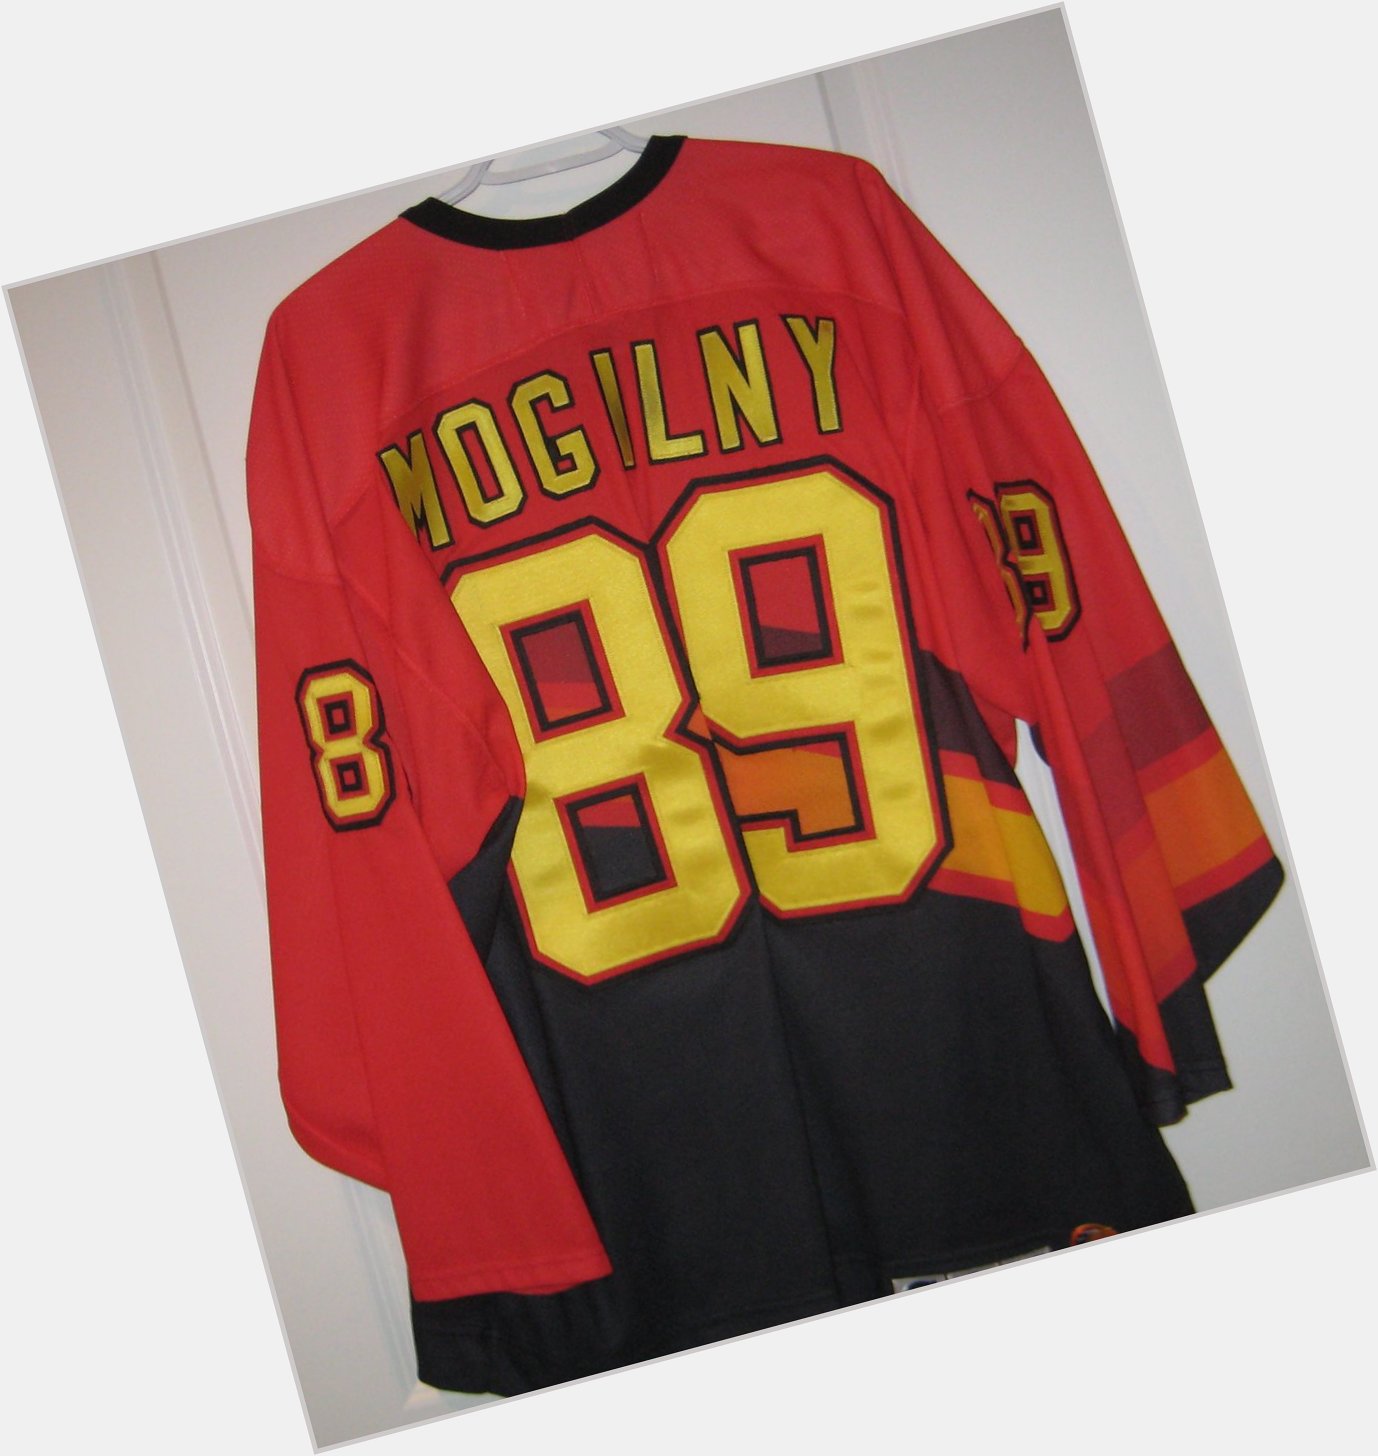 Happy 53rd Birthday Alexander Mogilny.....Jersey in my collection 